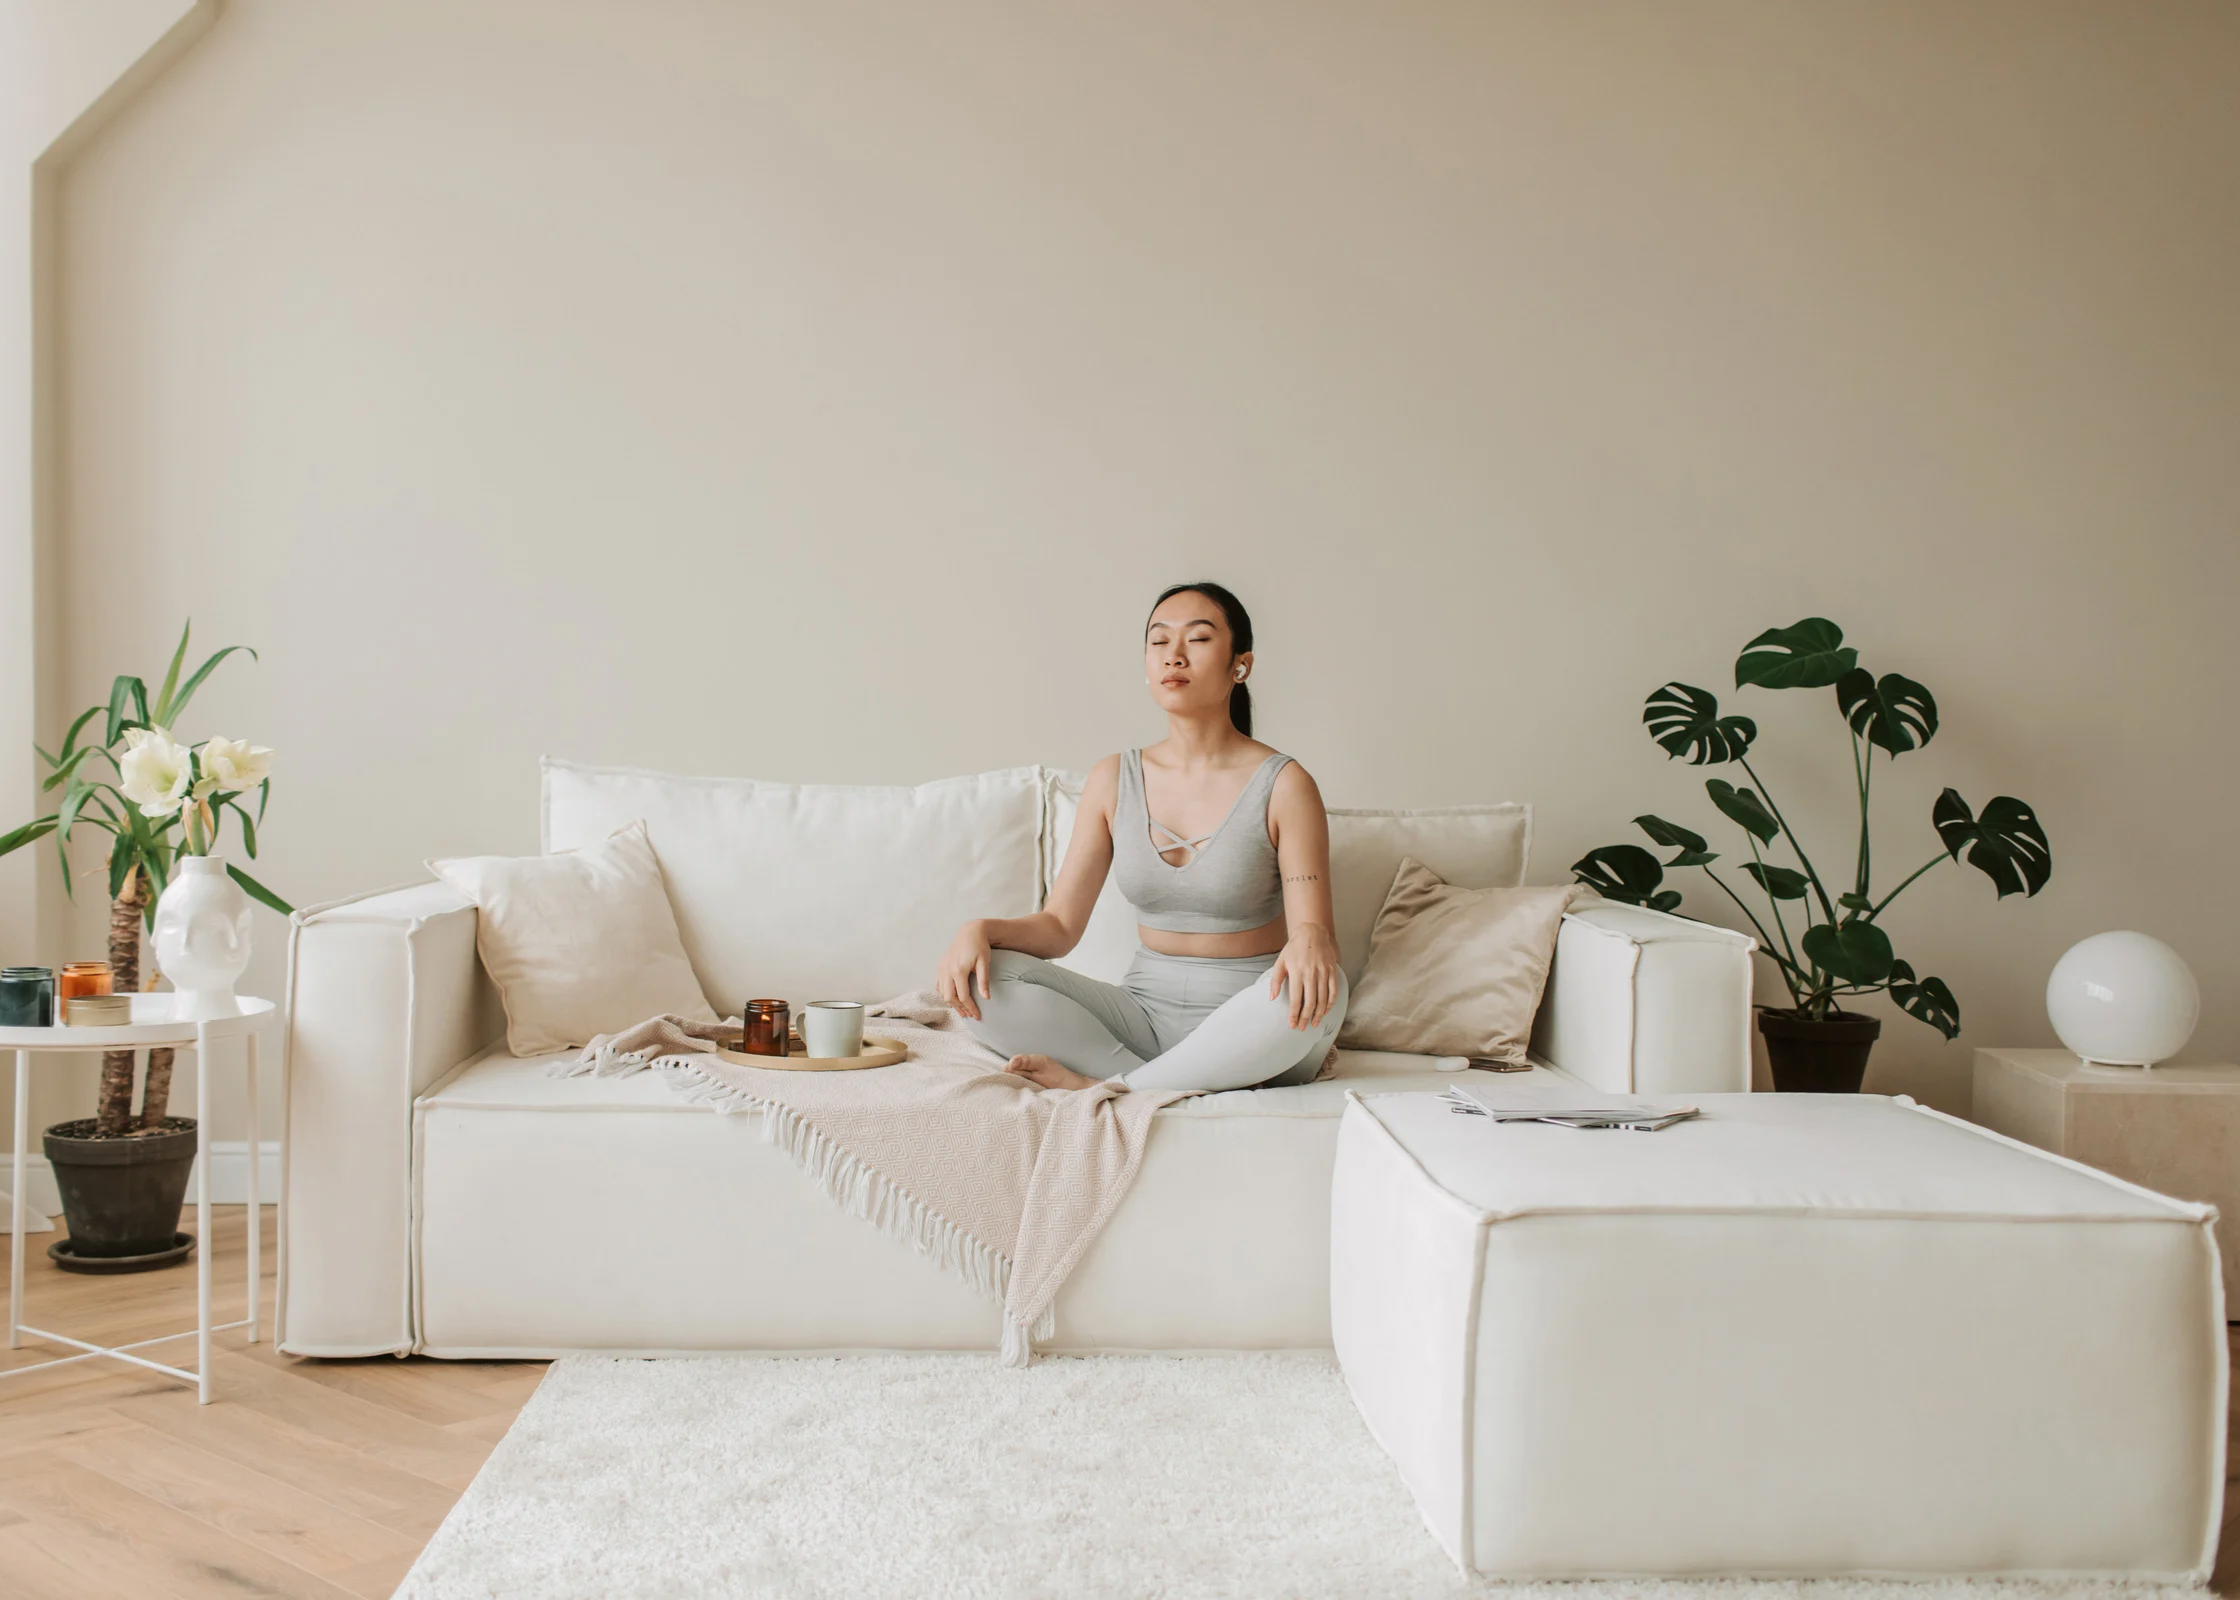 woman meditating on the sofa. how to glow up. glow up tips. how to glow up in a week. How to glow up overnight. how to get a glow up. how to have a glow up. glow ups. how to be beautiful. fast and instant glowing up tips